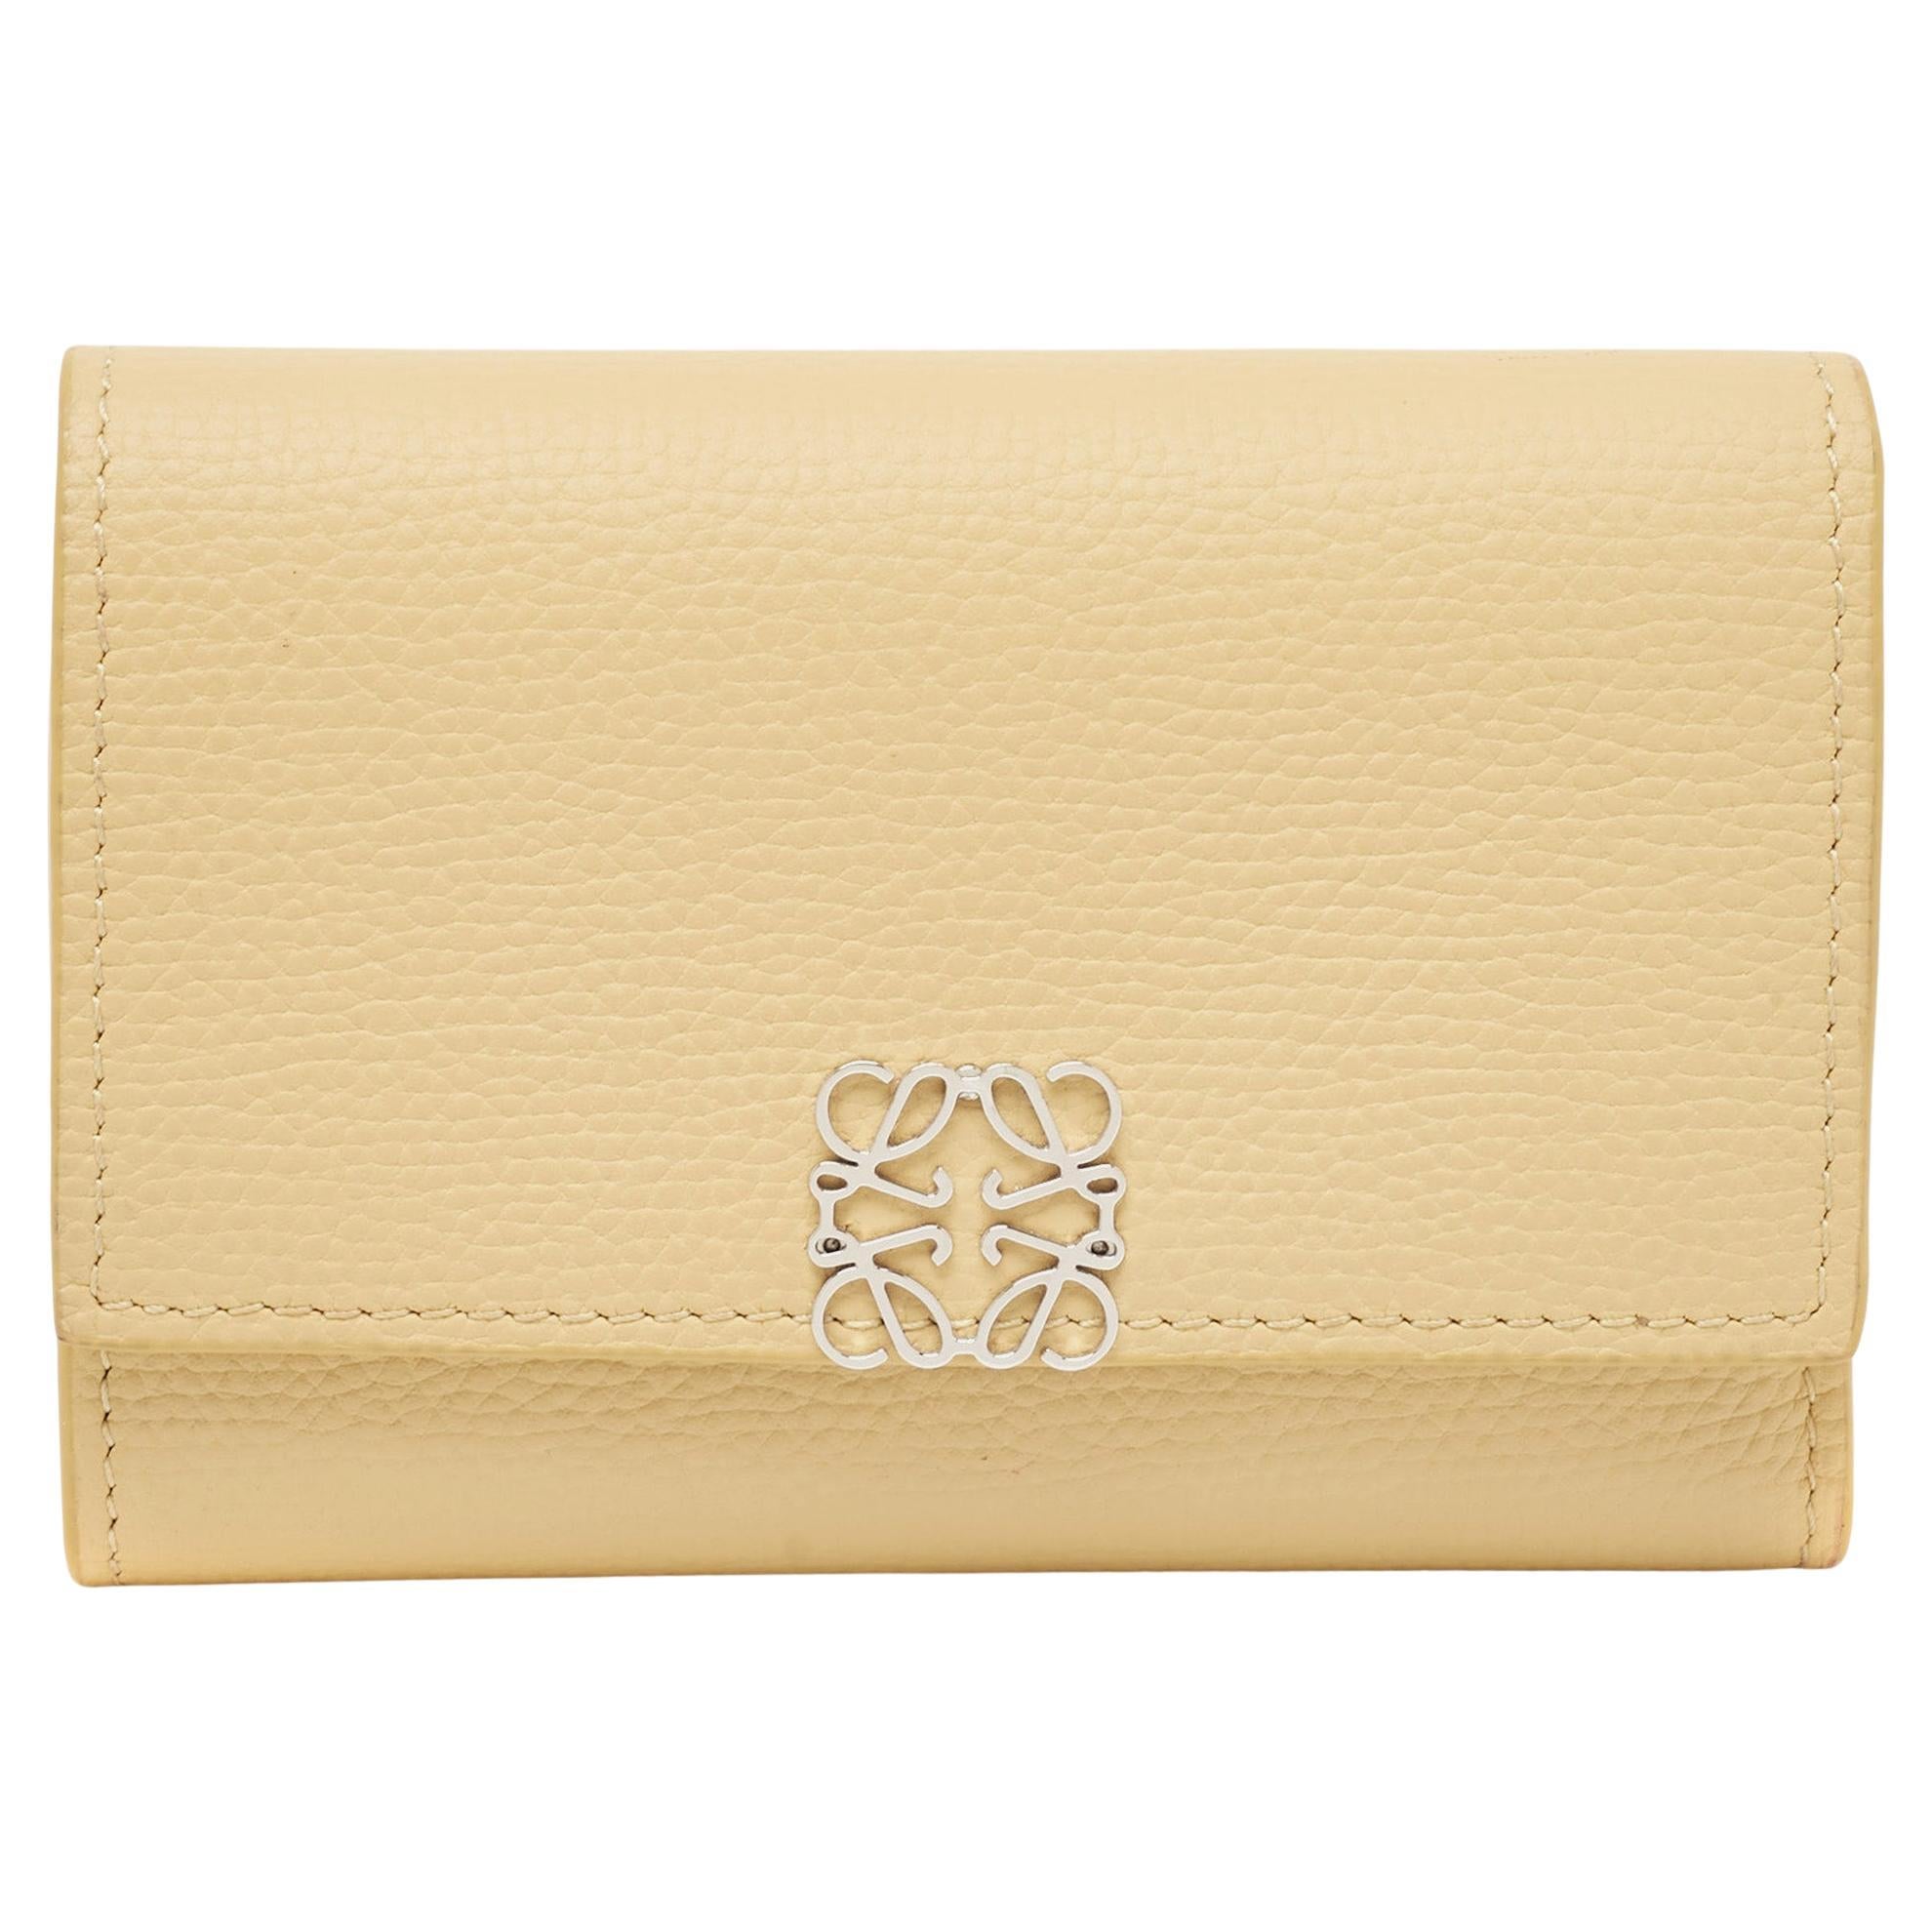 Loewe Yellow Leather Anagram Trifold Wallet For Sale